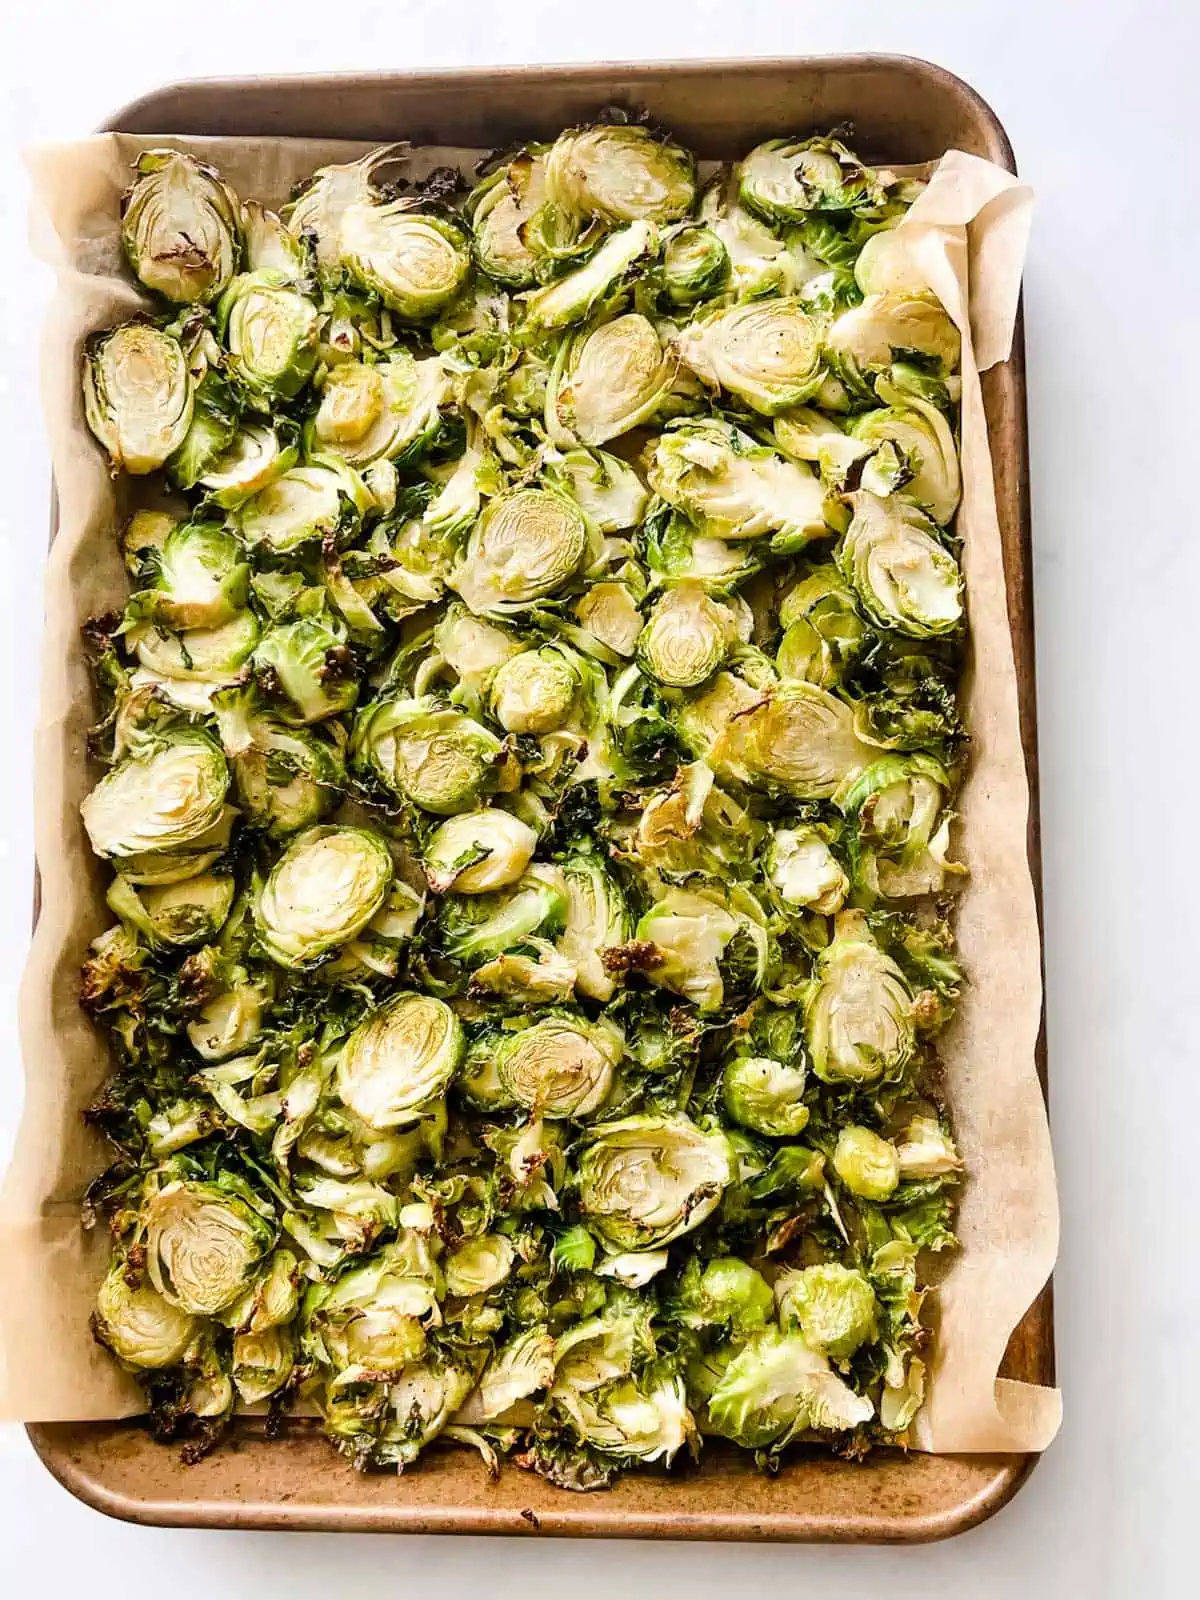 Photo of roasted Brussels sprouts that have just been removed from the oven.